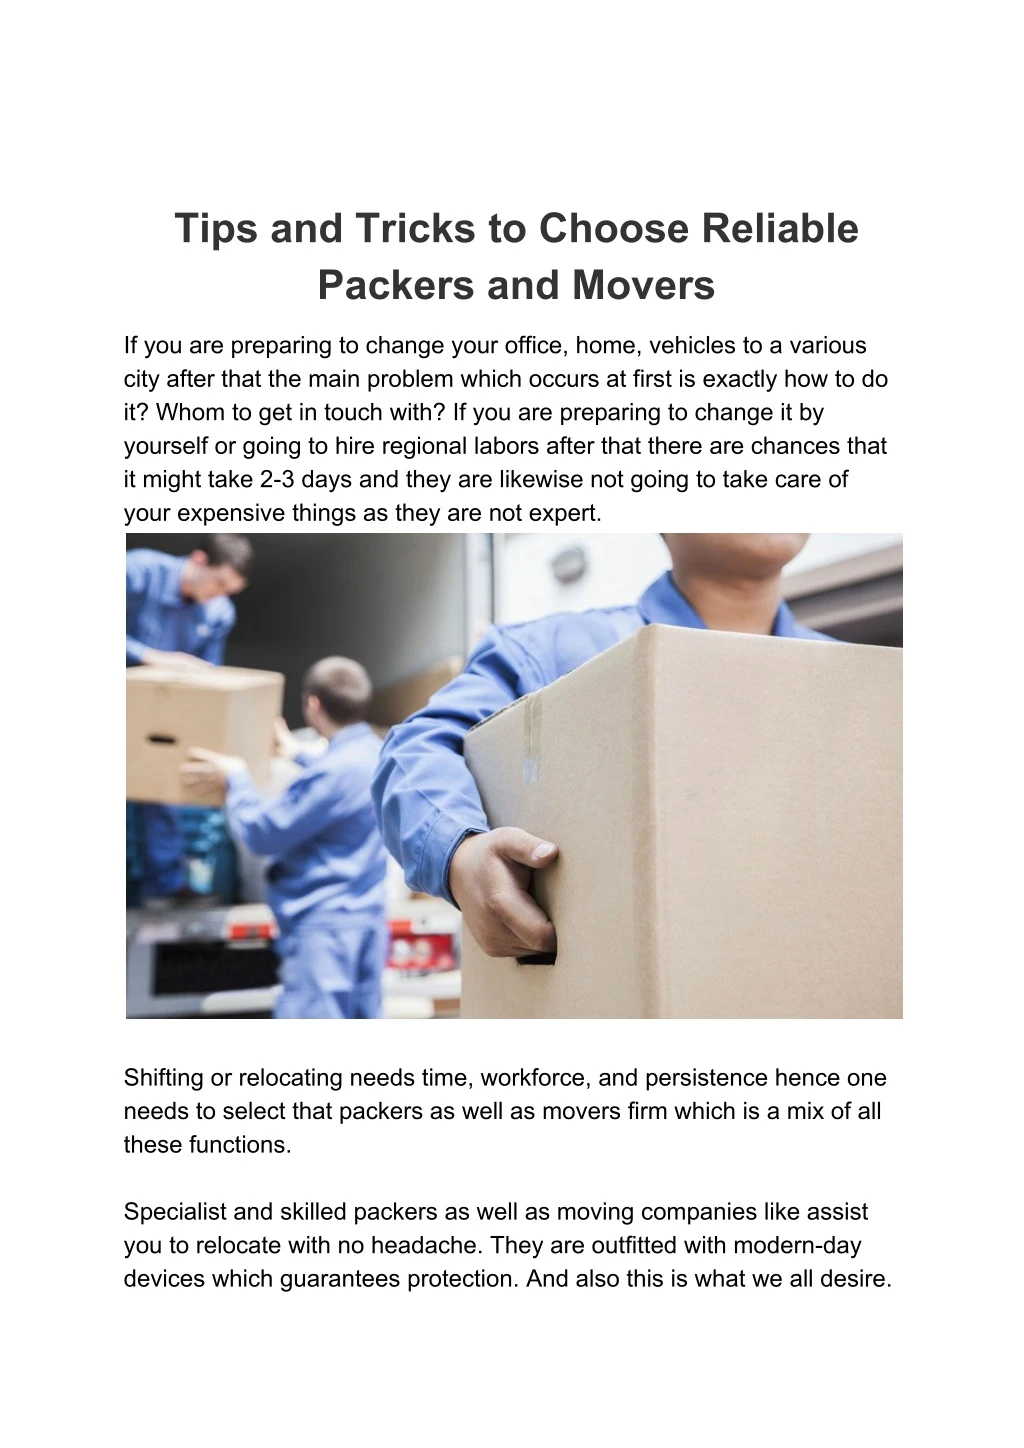 tips and tricks to choose reliable packers